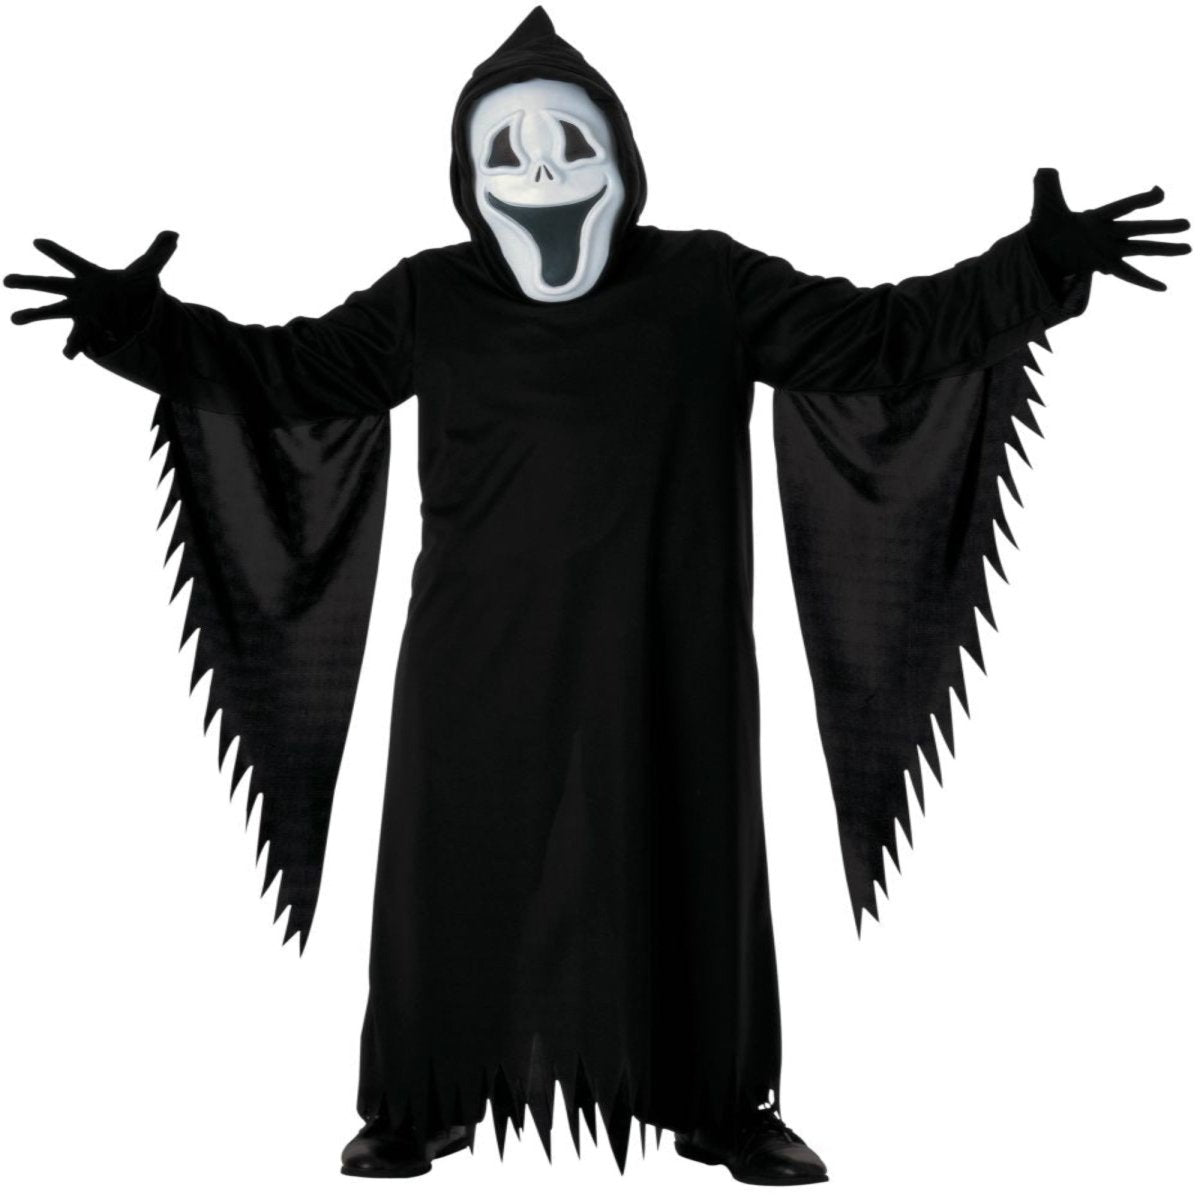 Kids Smiley the Ghost Costume - worldclasscostumes